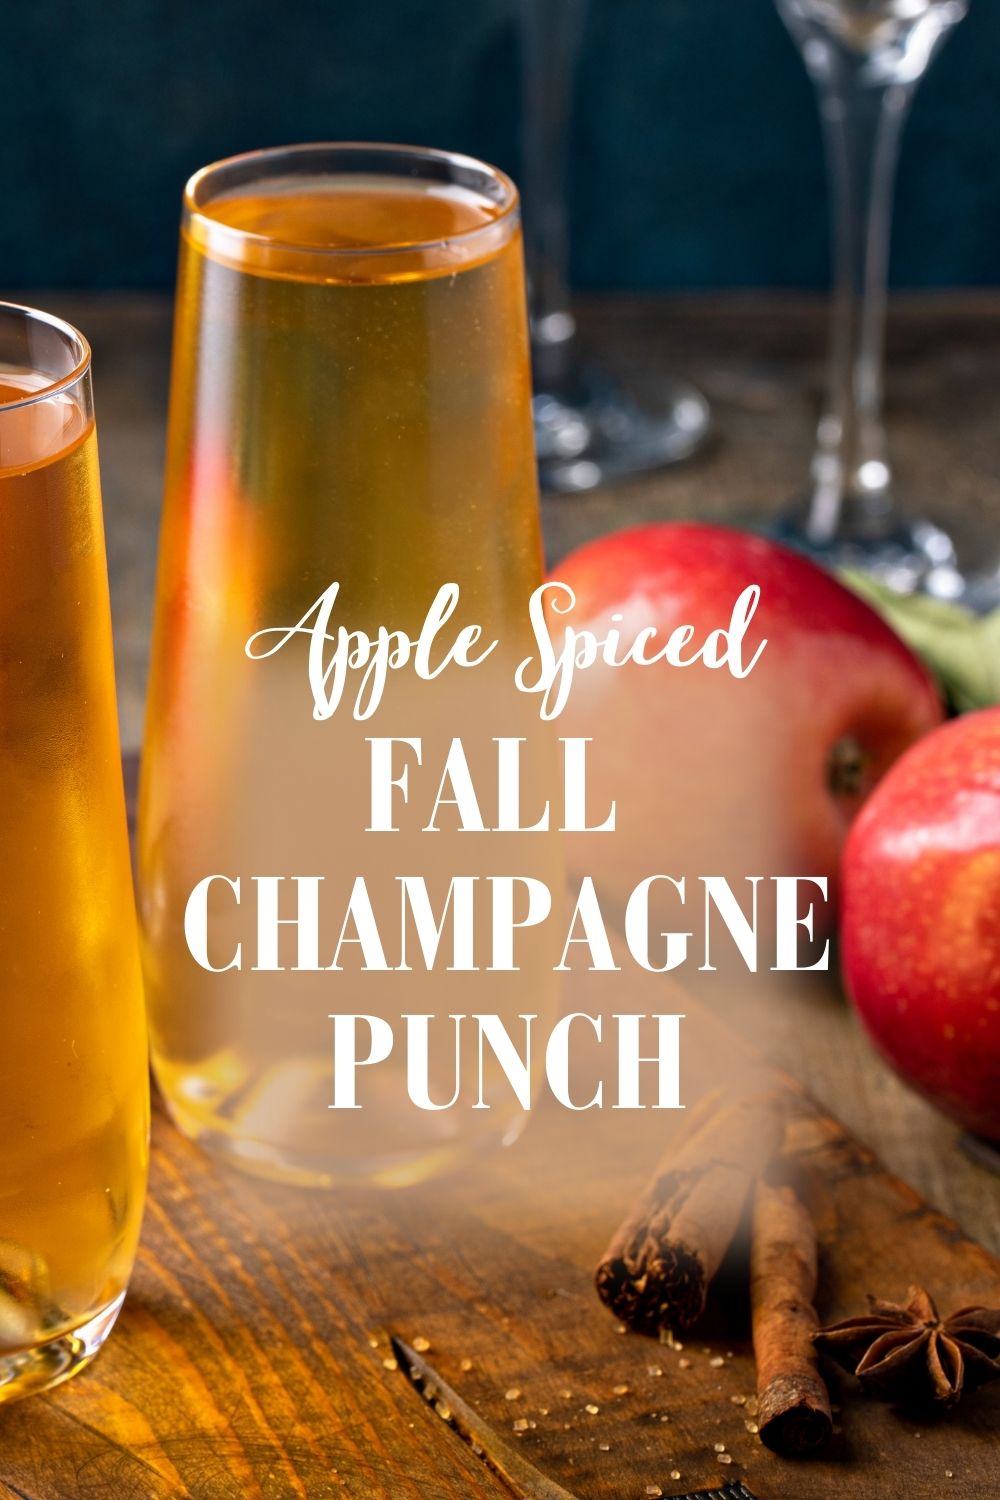 Fall Champagne Punch
Thanksgiving Cocktail
Fall Cocktail